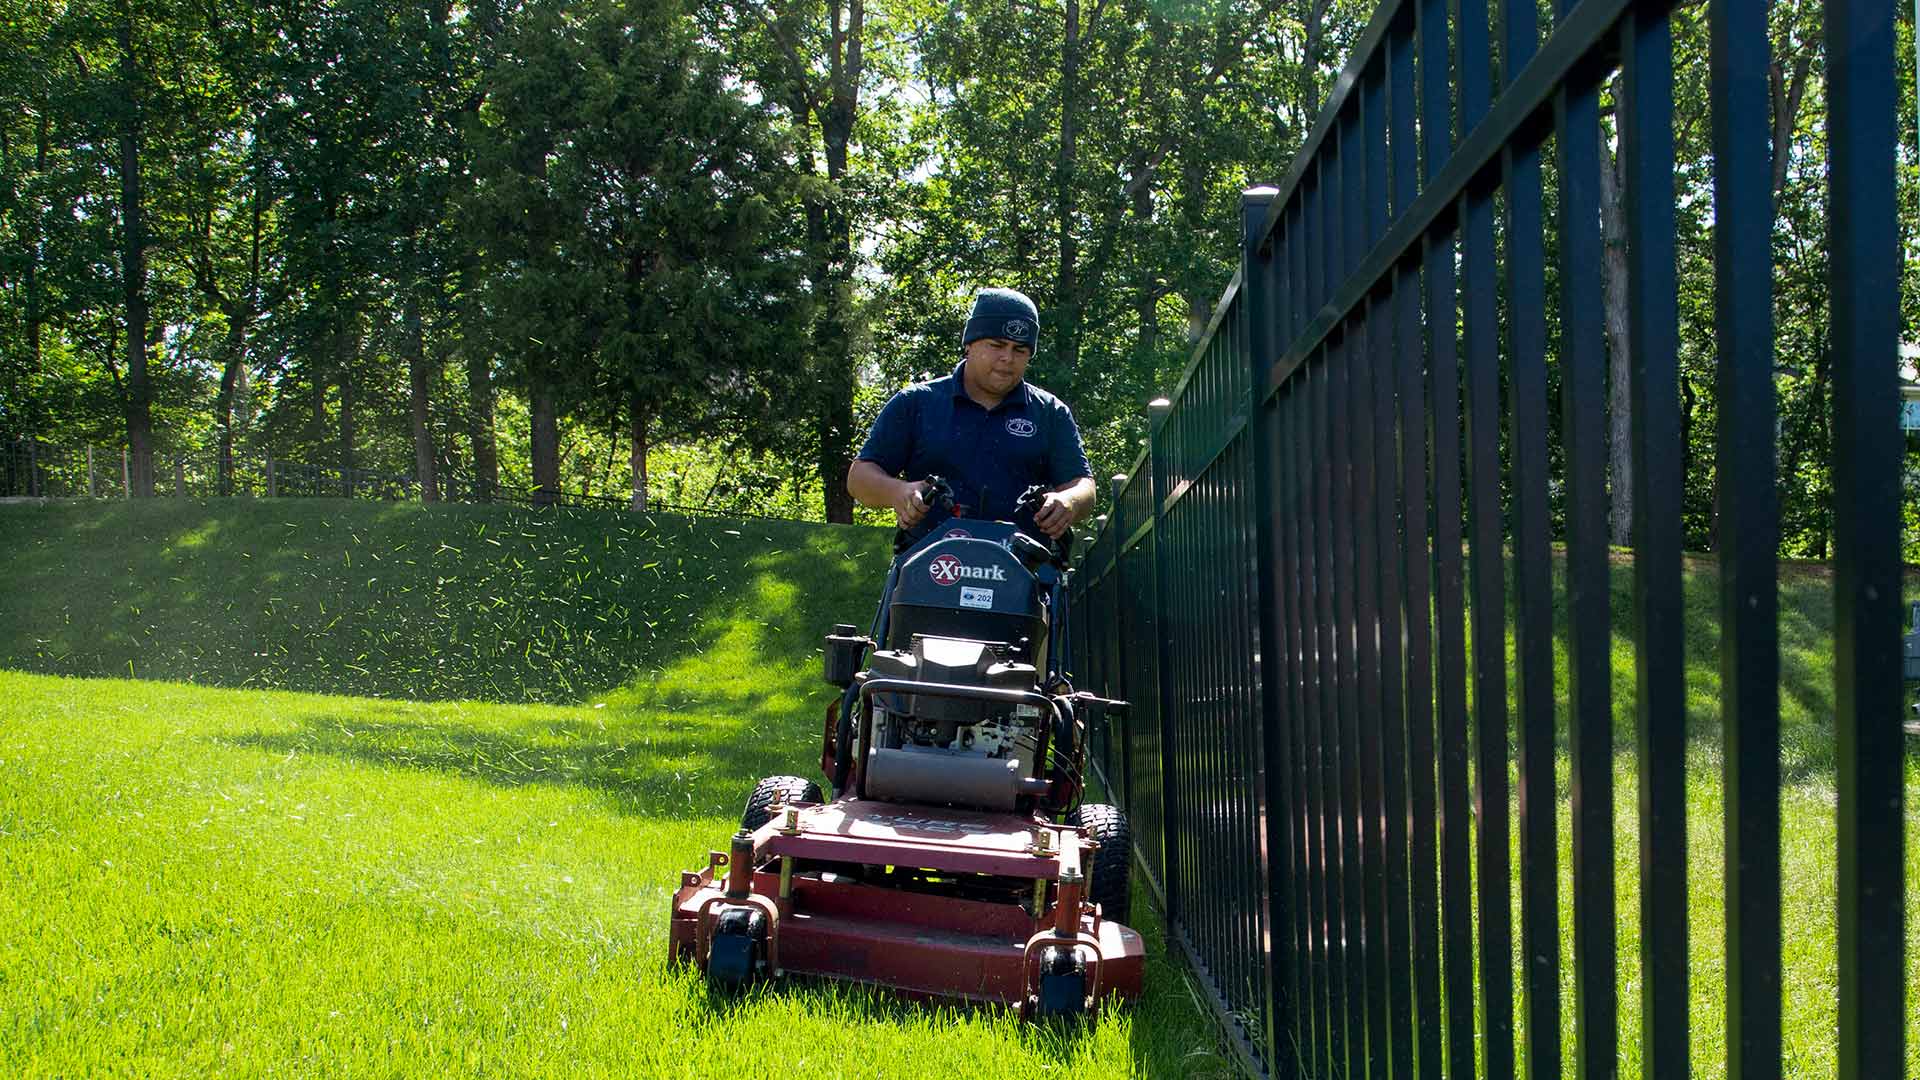 A worker is mowing a lawn by a fence with a line of trees in the background in Fairfax, VA.